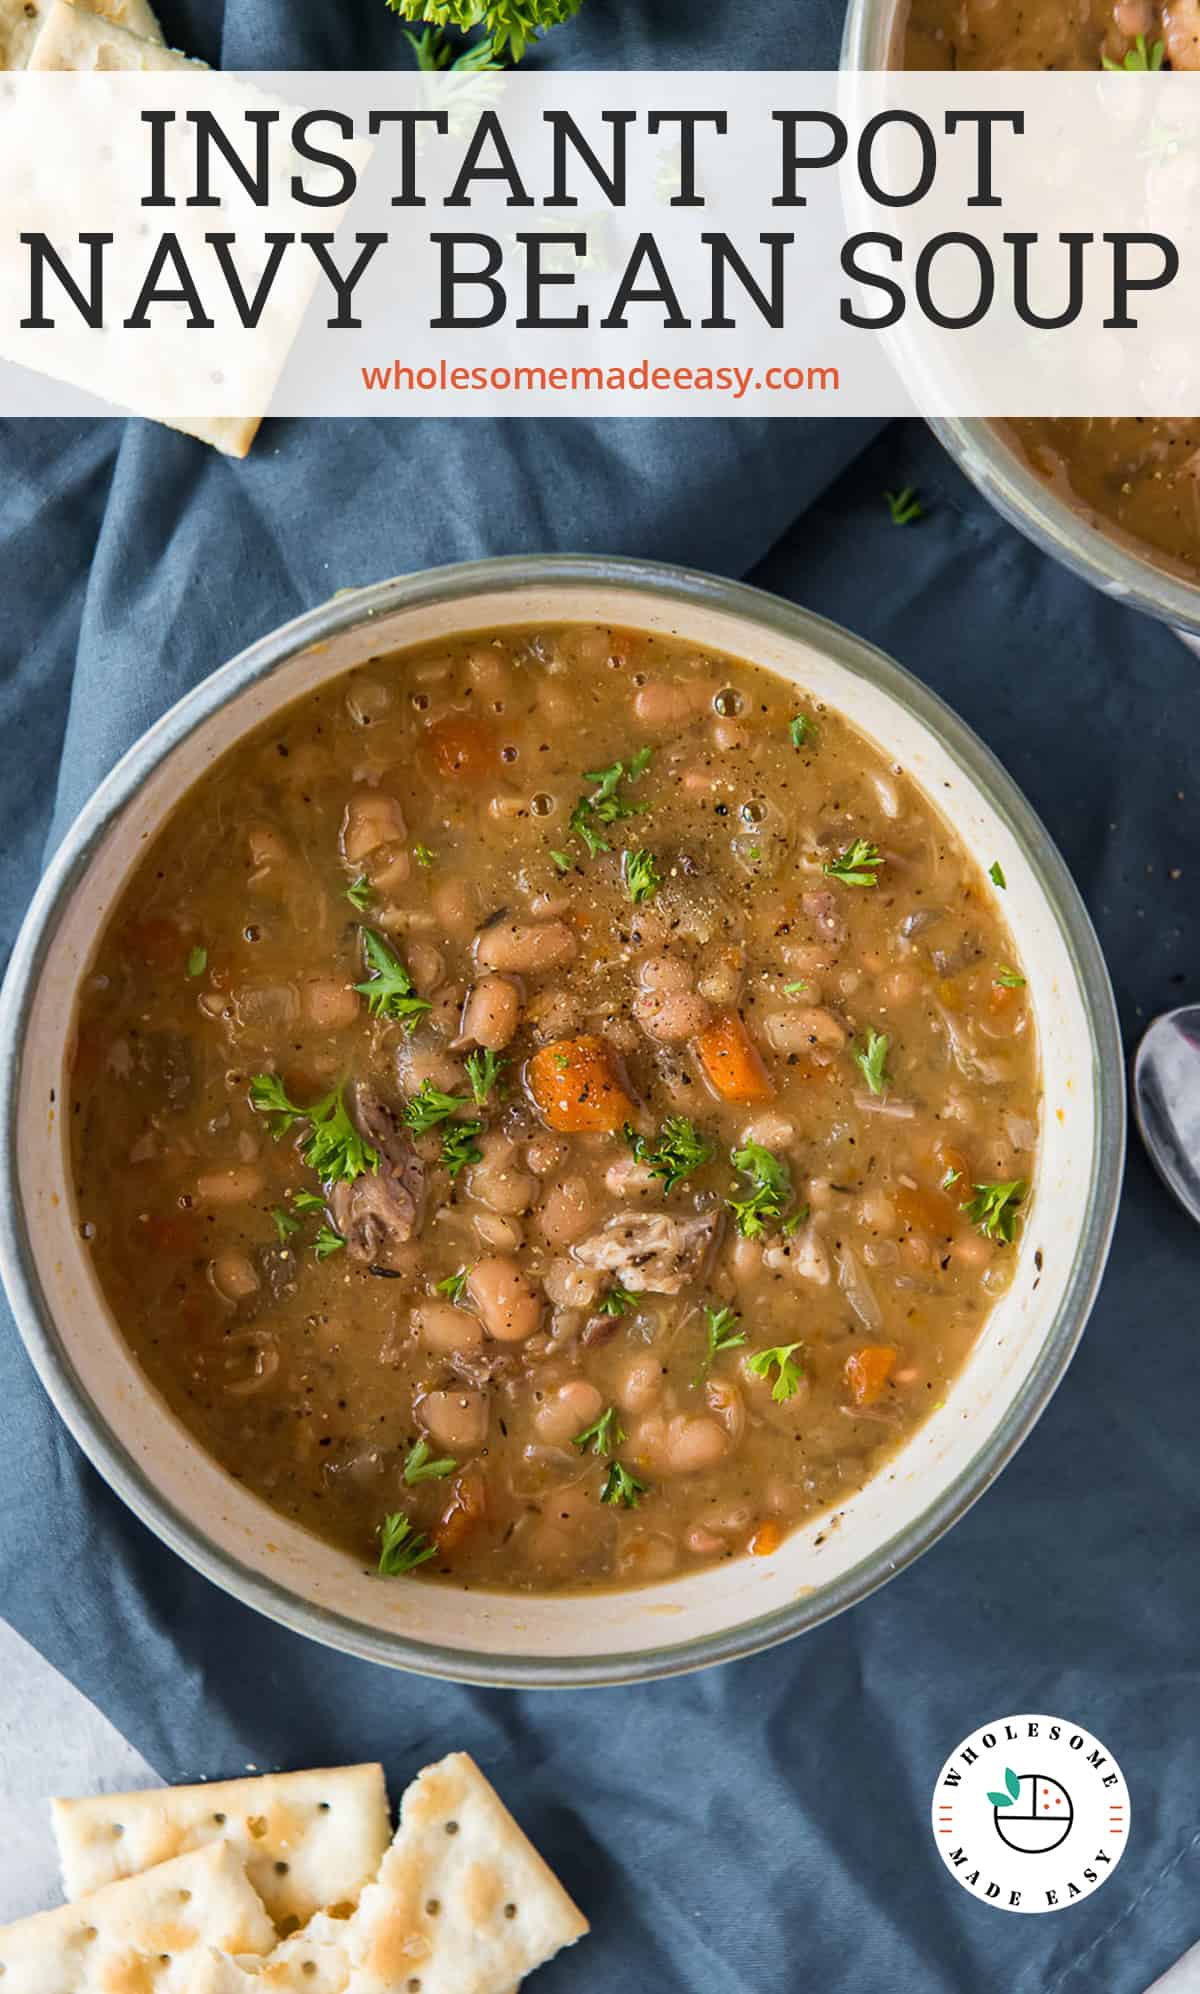 A bowl of Instant Pot Navy Bean Soup with Saltines and text overlay.